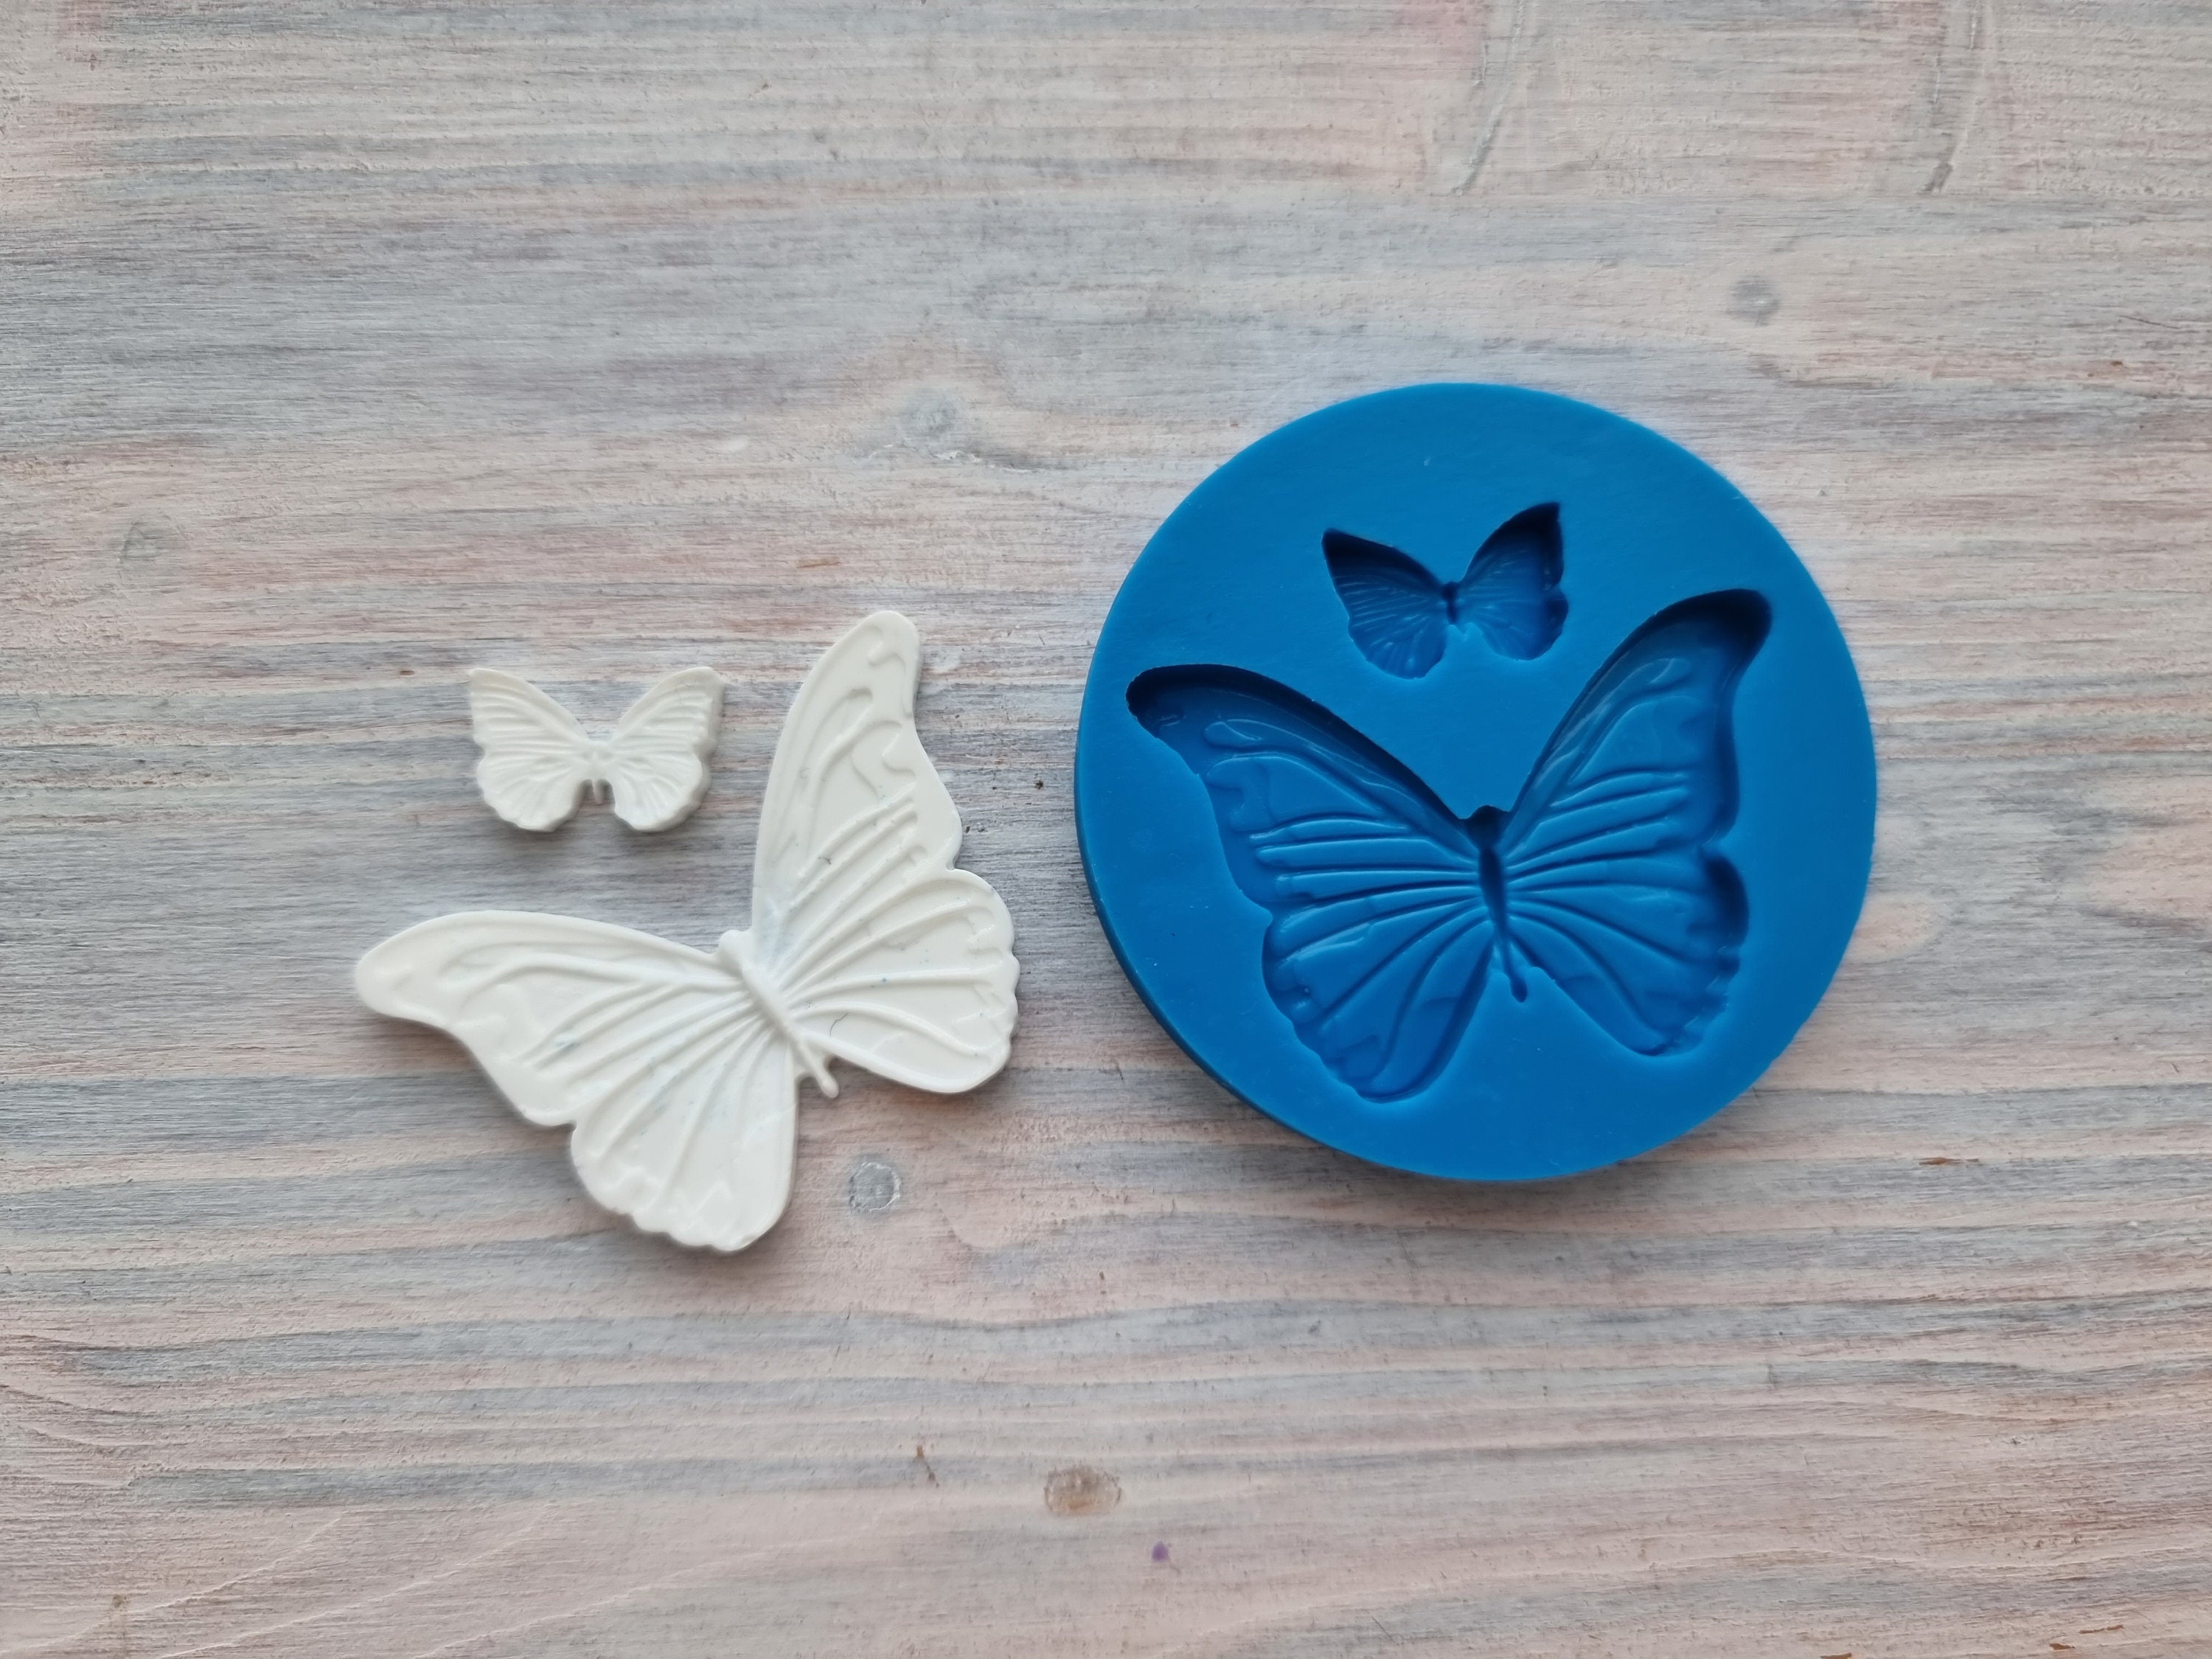 FLEXARTE Butterfly Set Silicone Mold